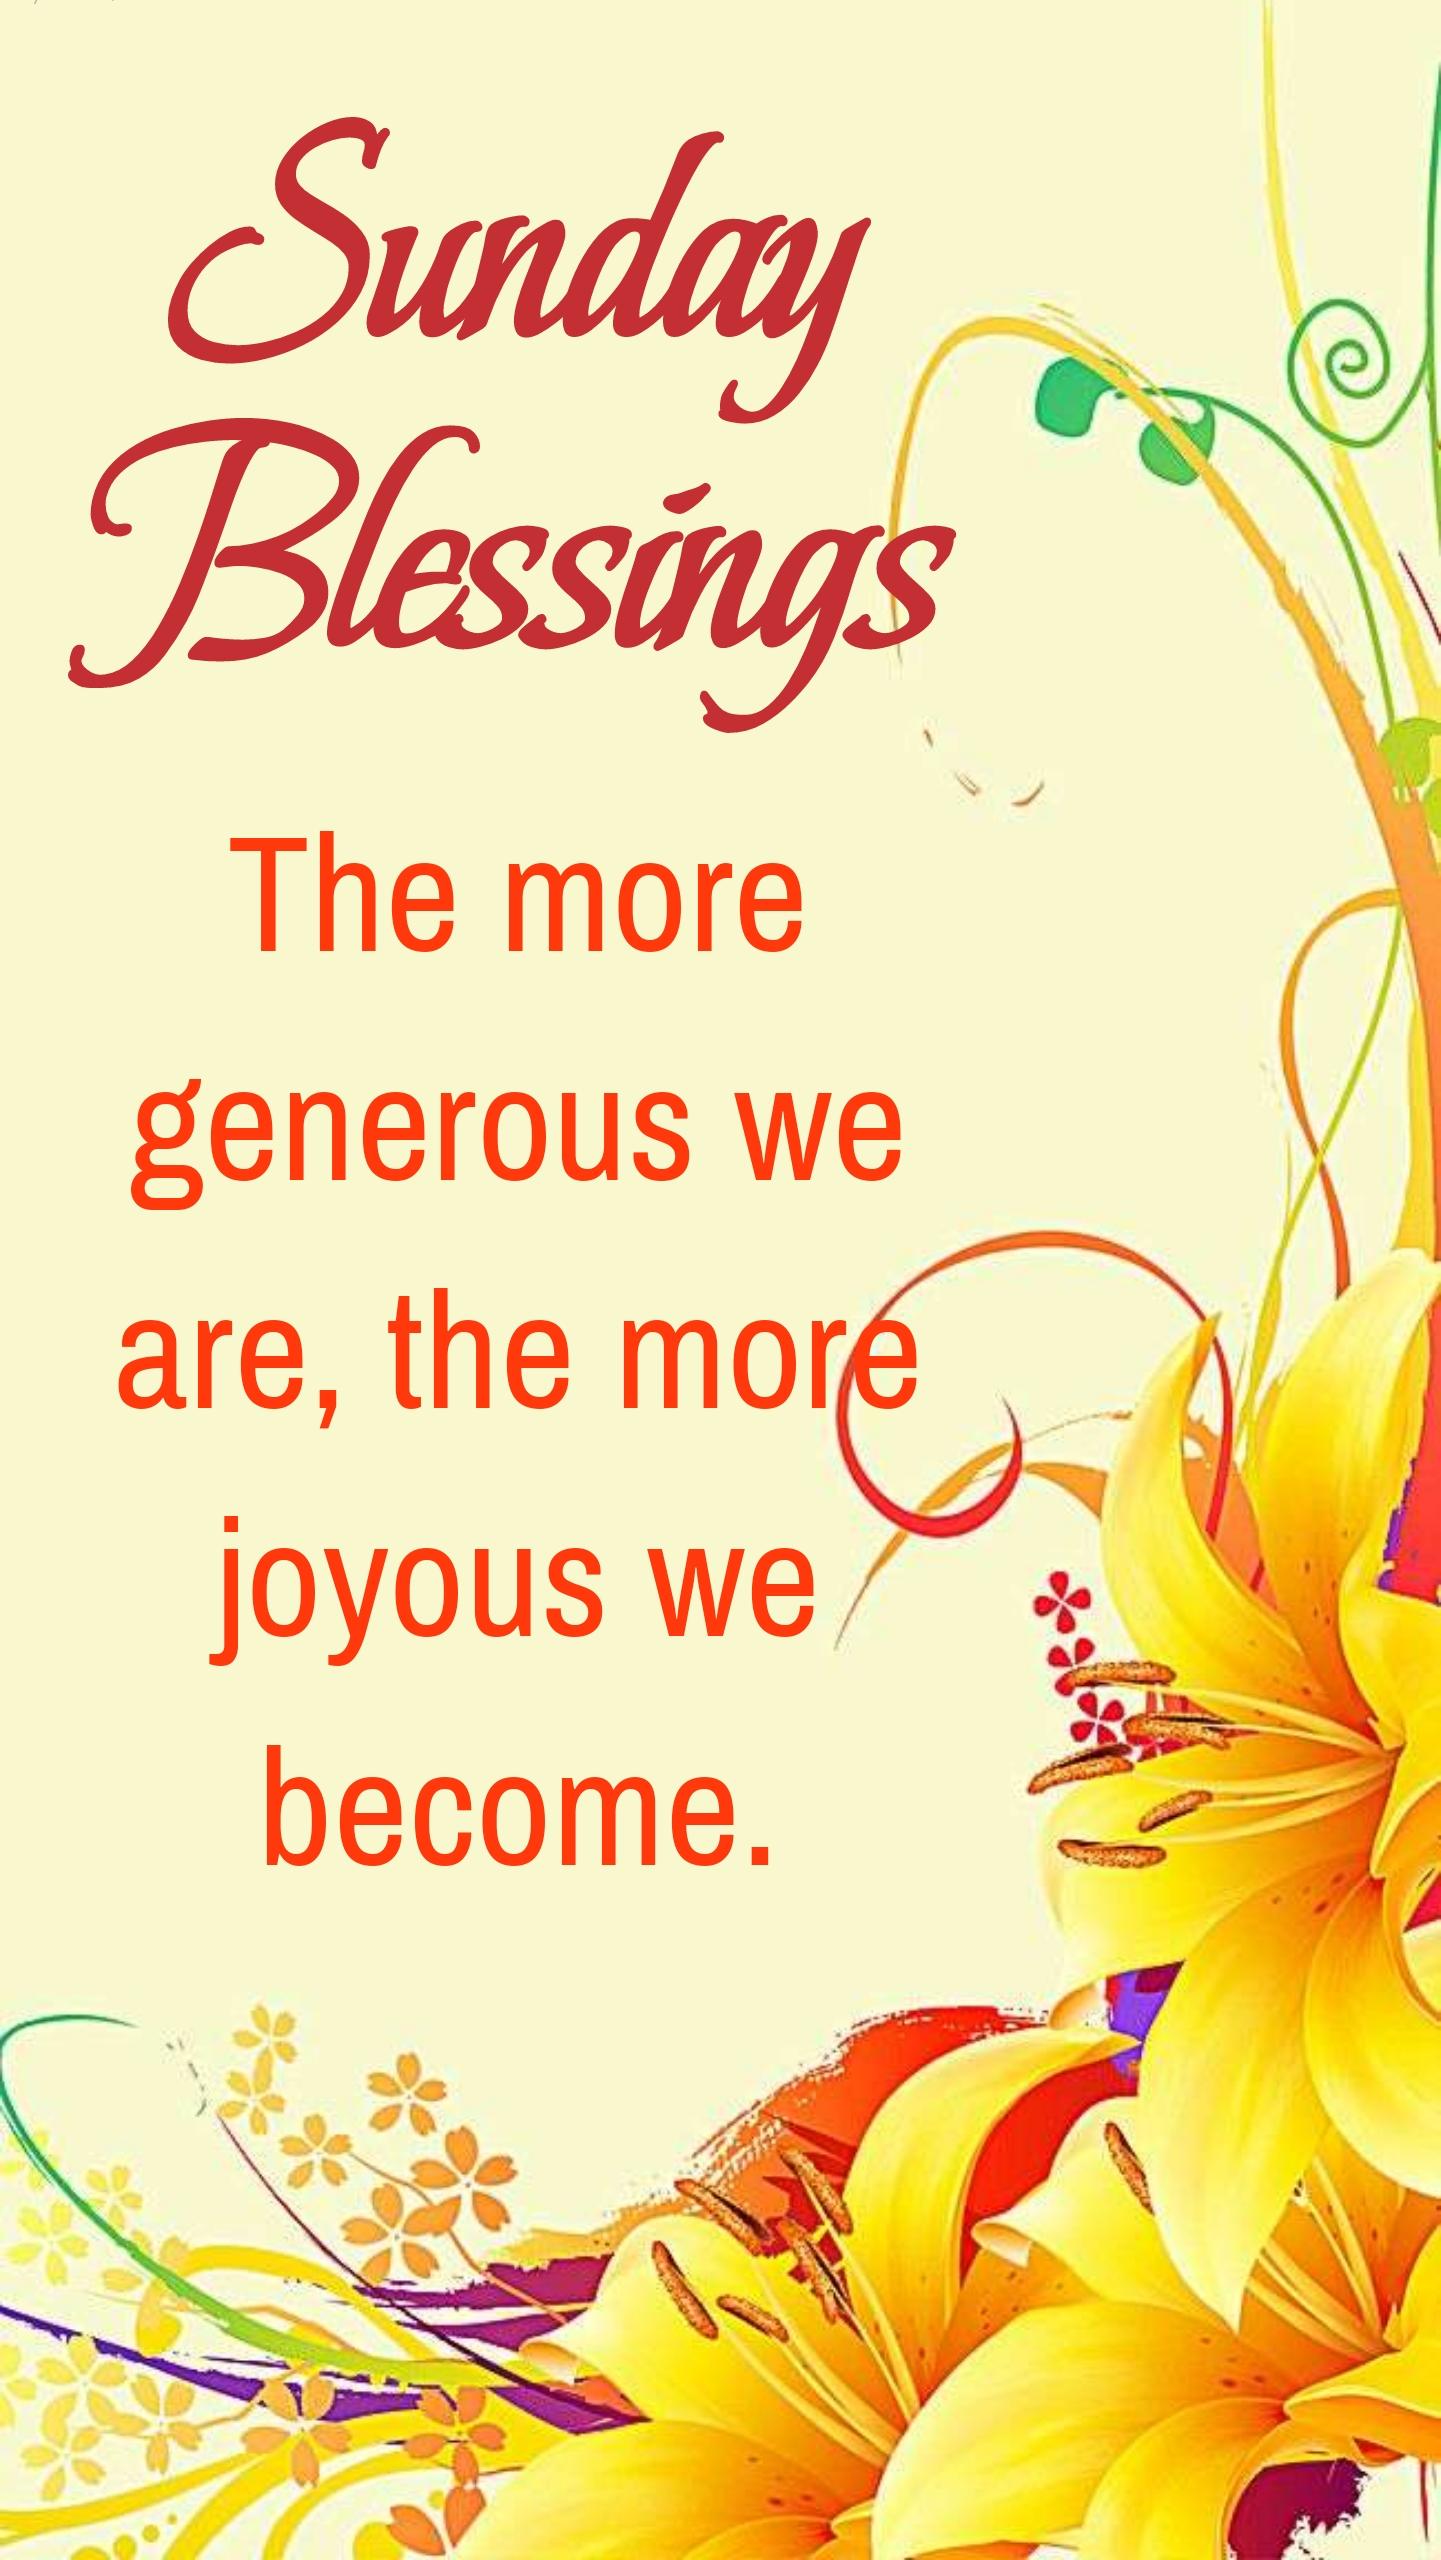 The more generous we are the more joyous we become